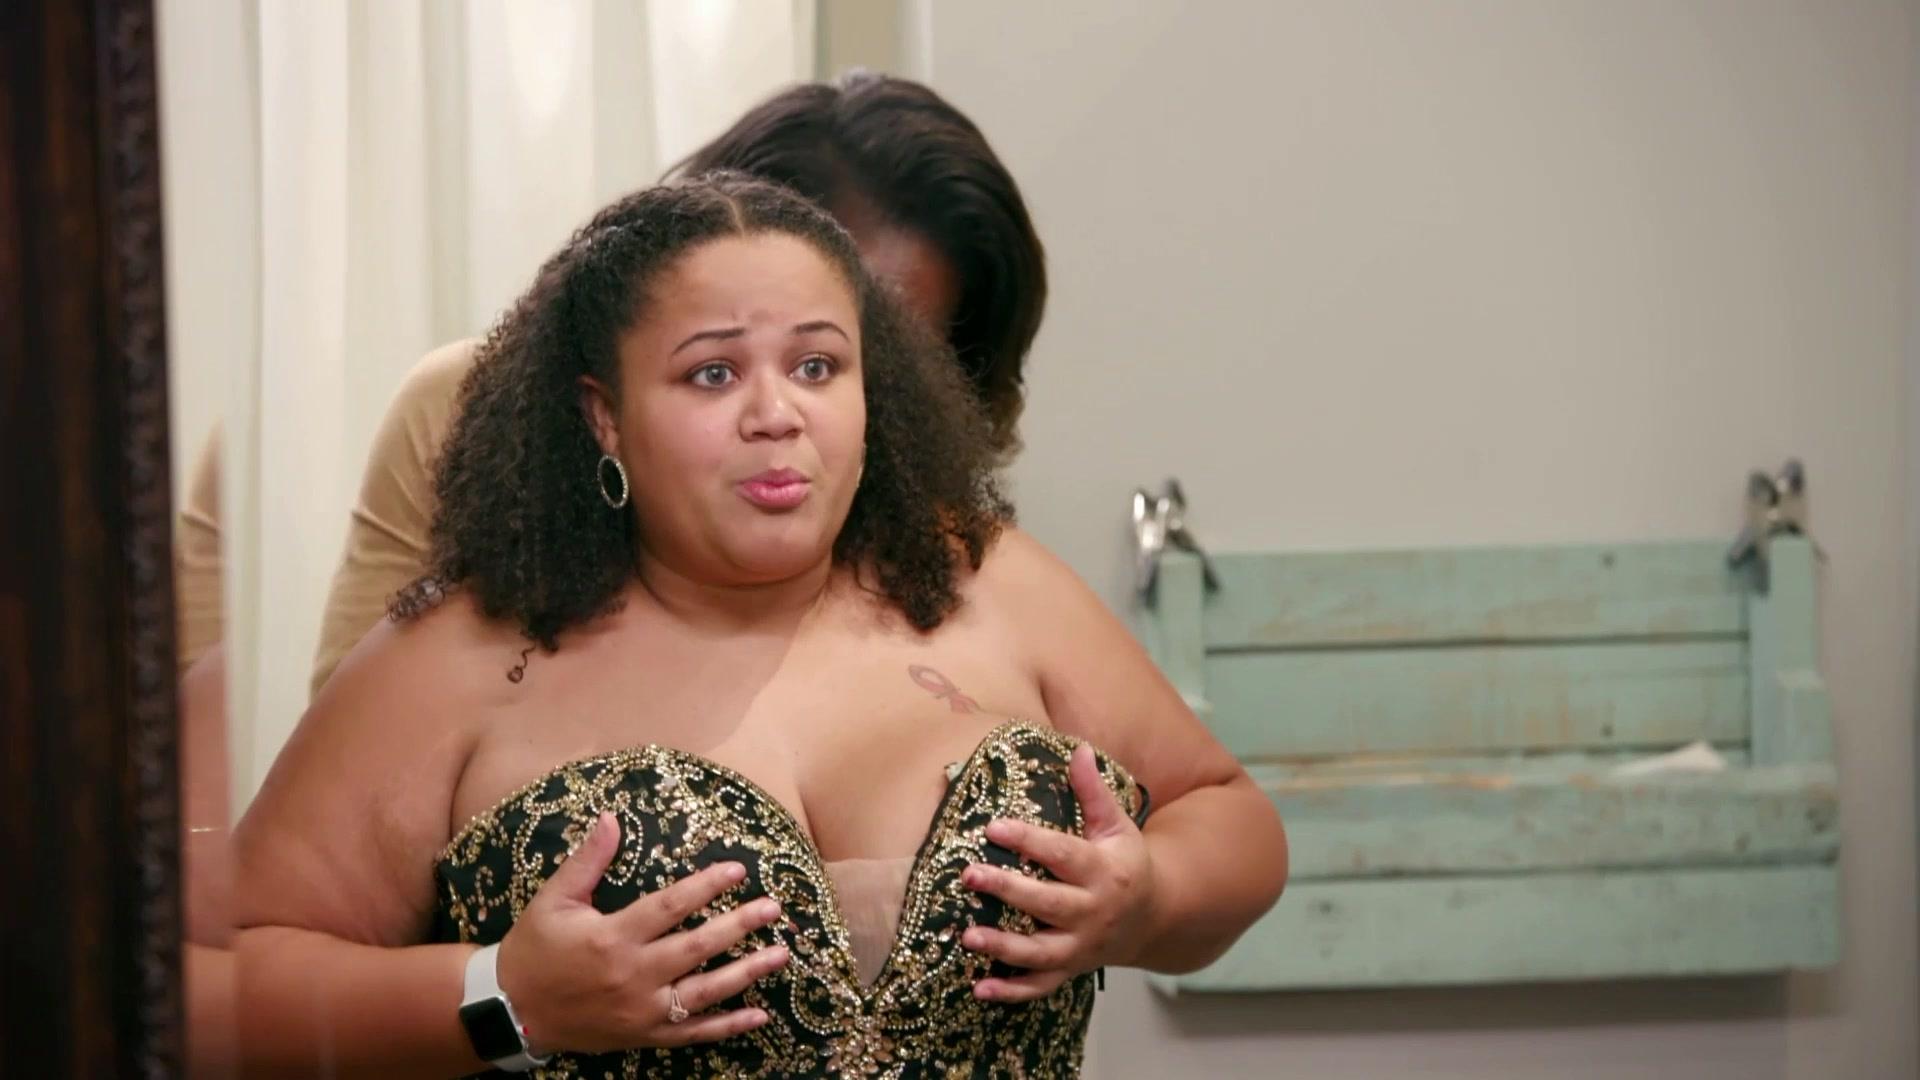 Amber's Wedding Dress Has a 'HOLE' Lot of Issues!